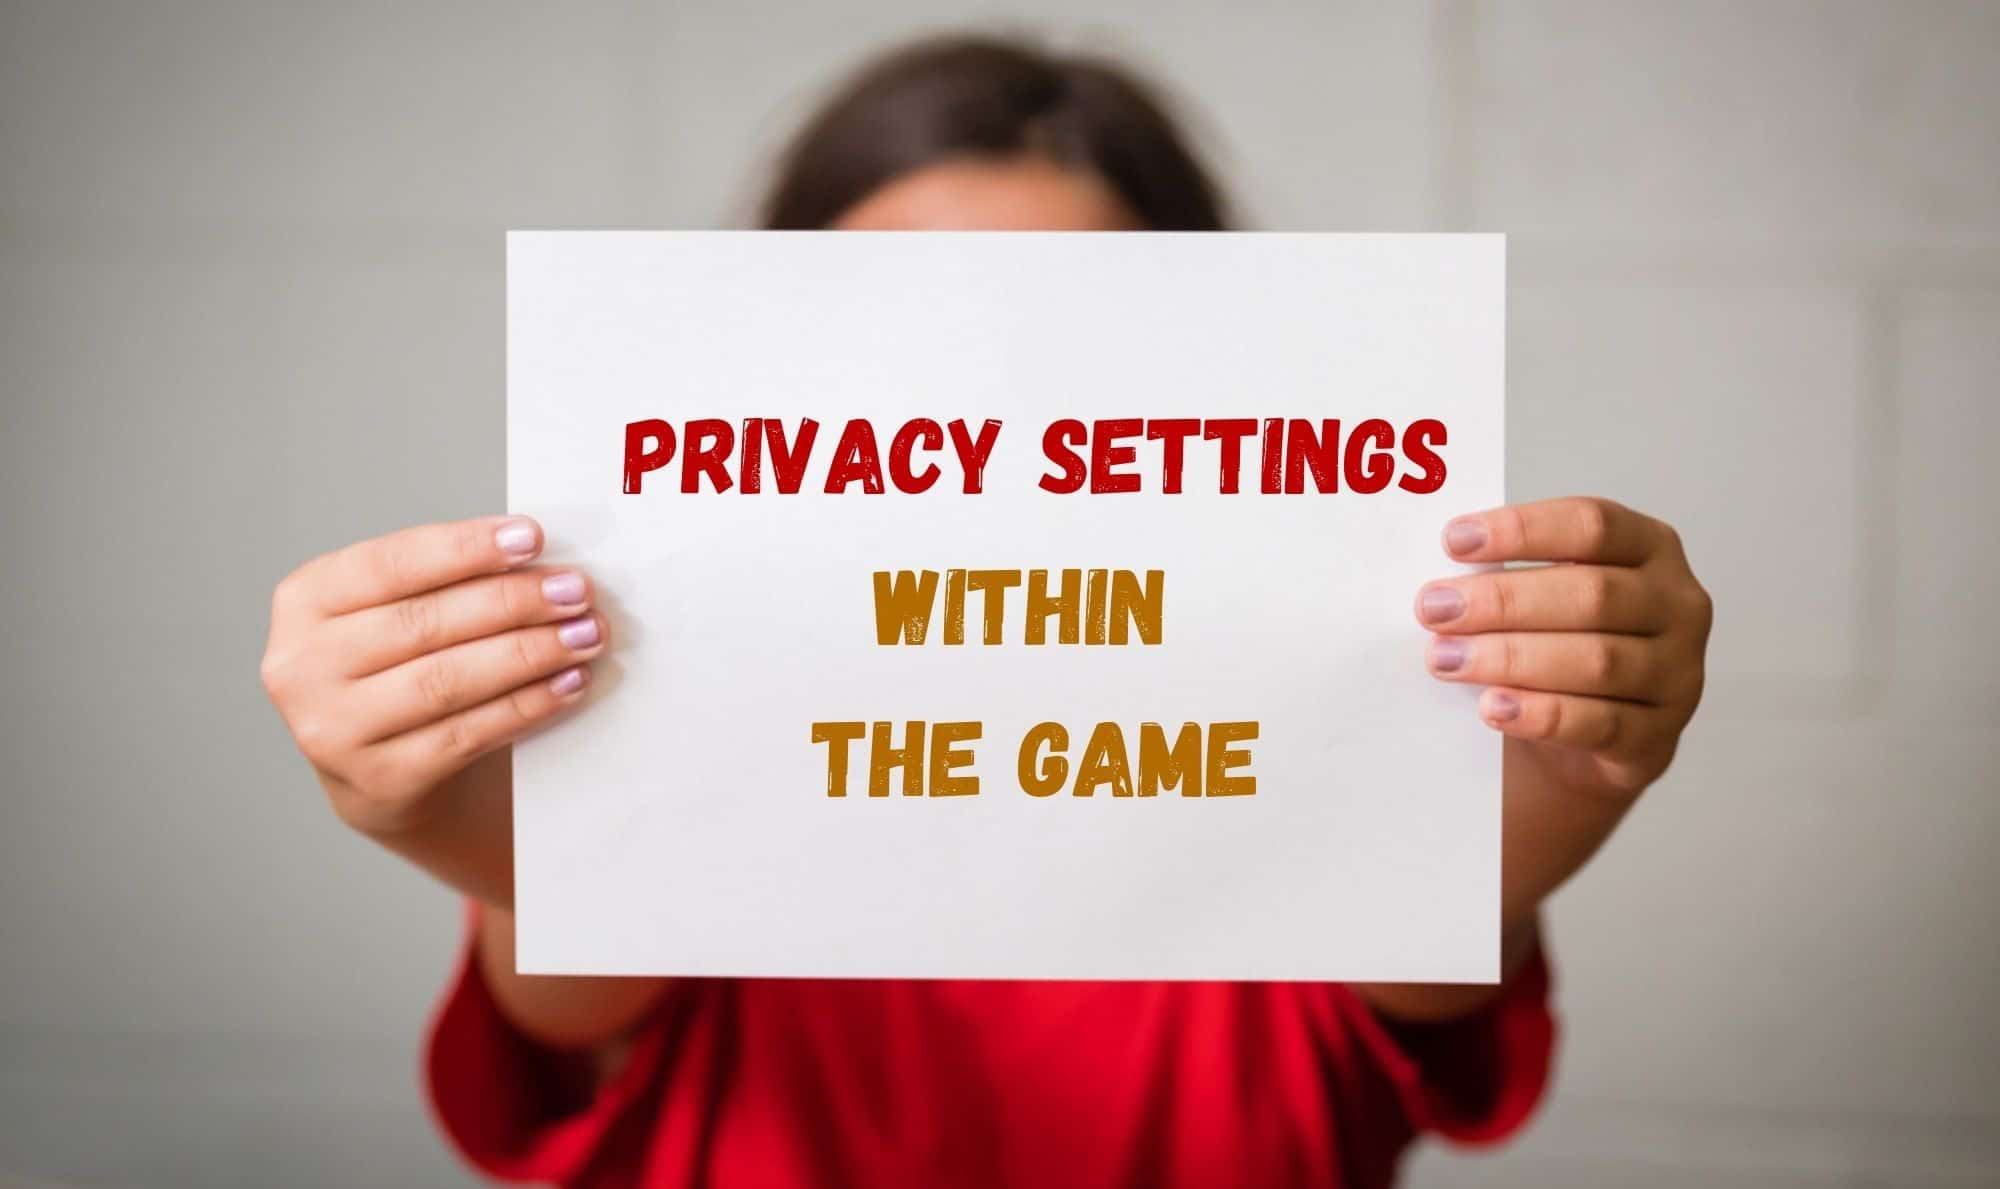 Privacy settings within the game